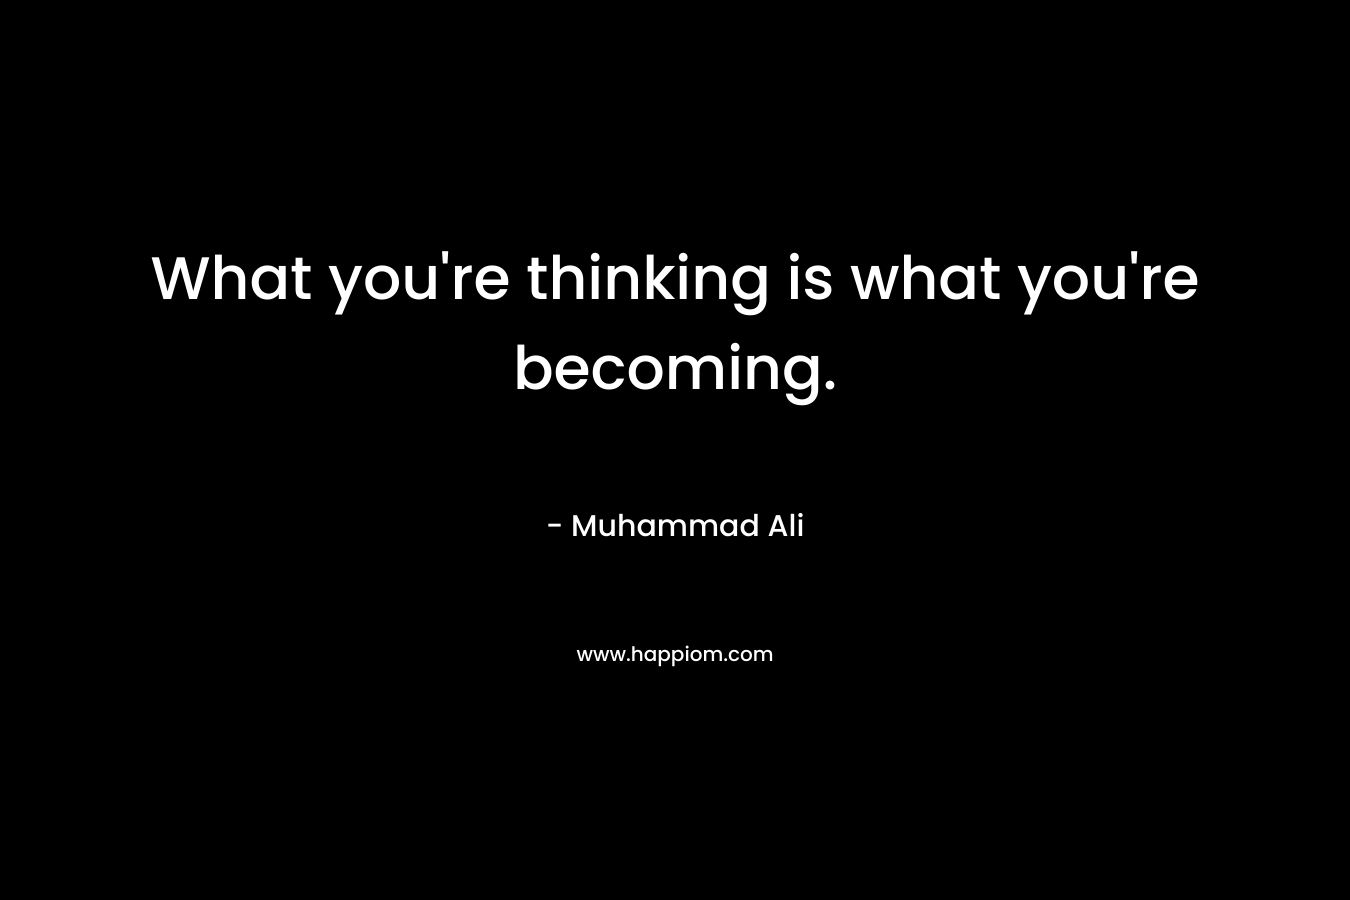 What you're thinking is what you're becoming.